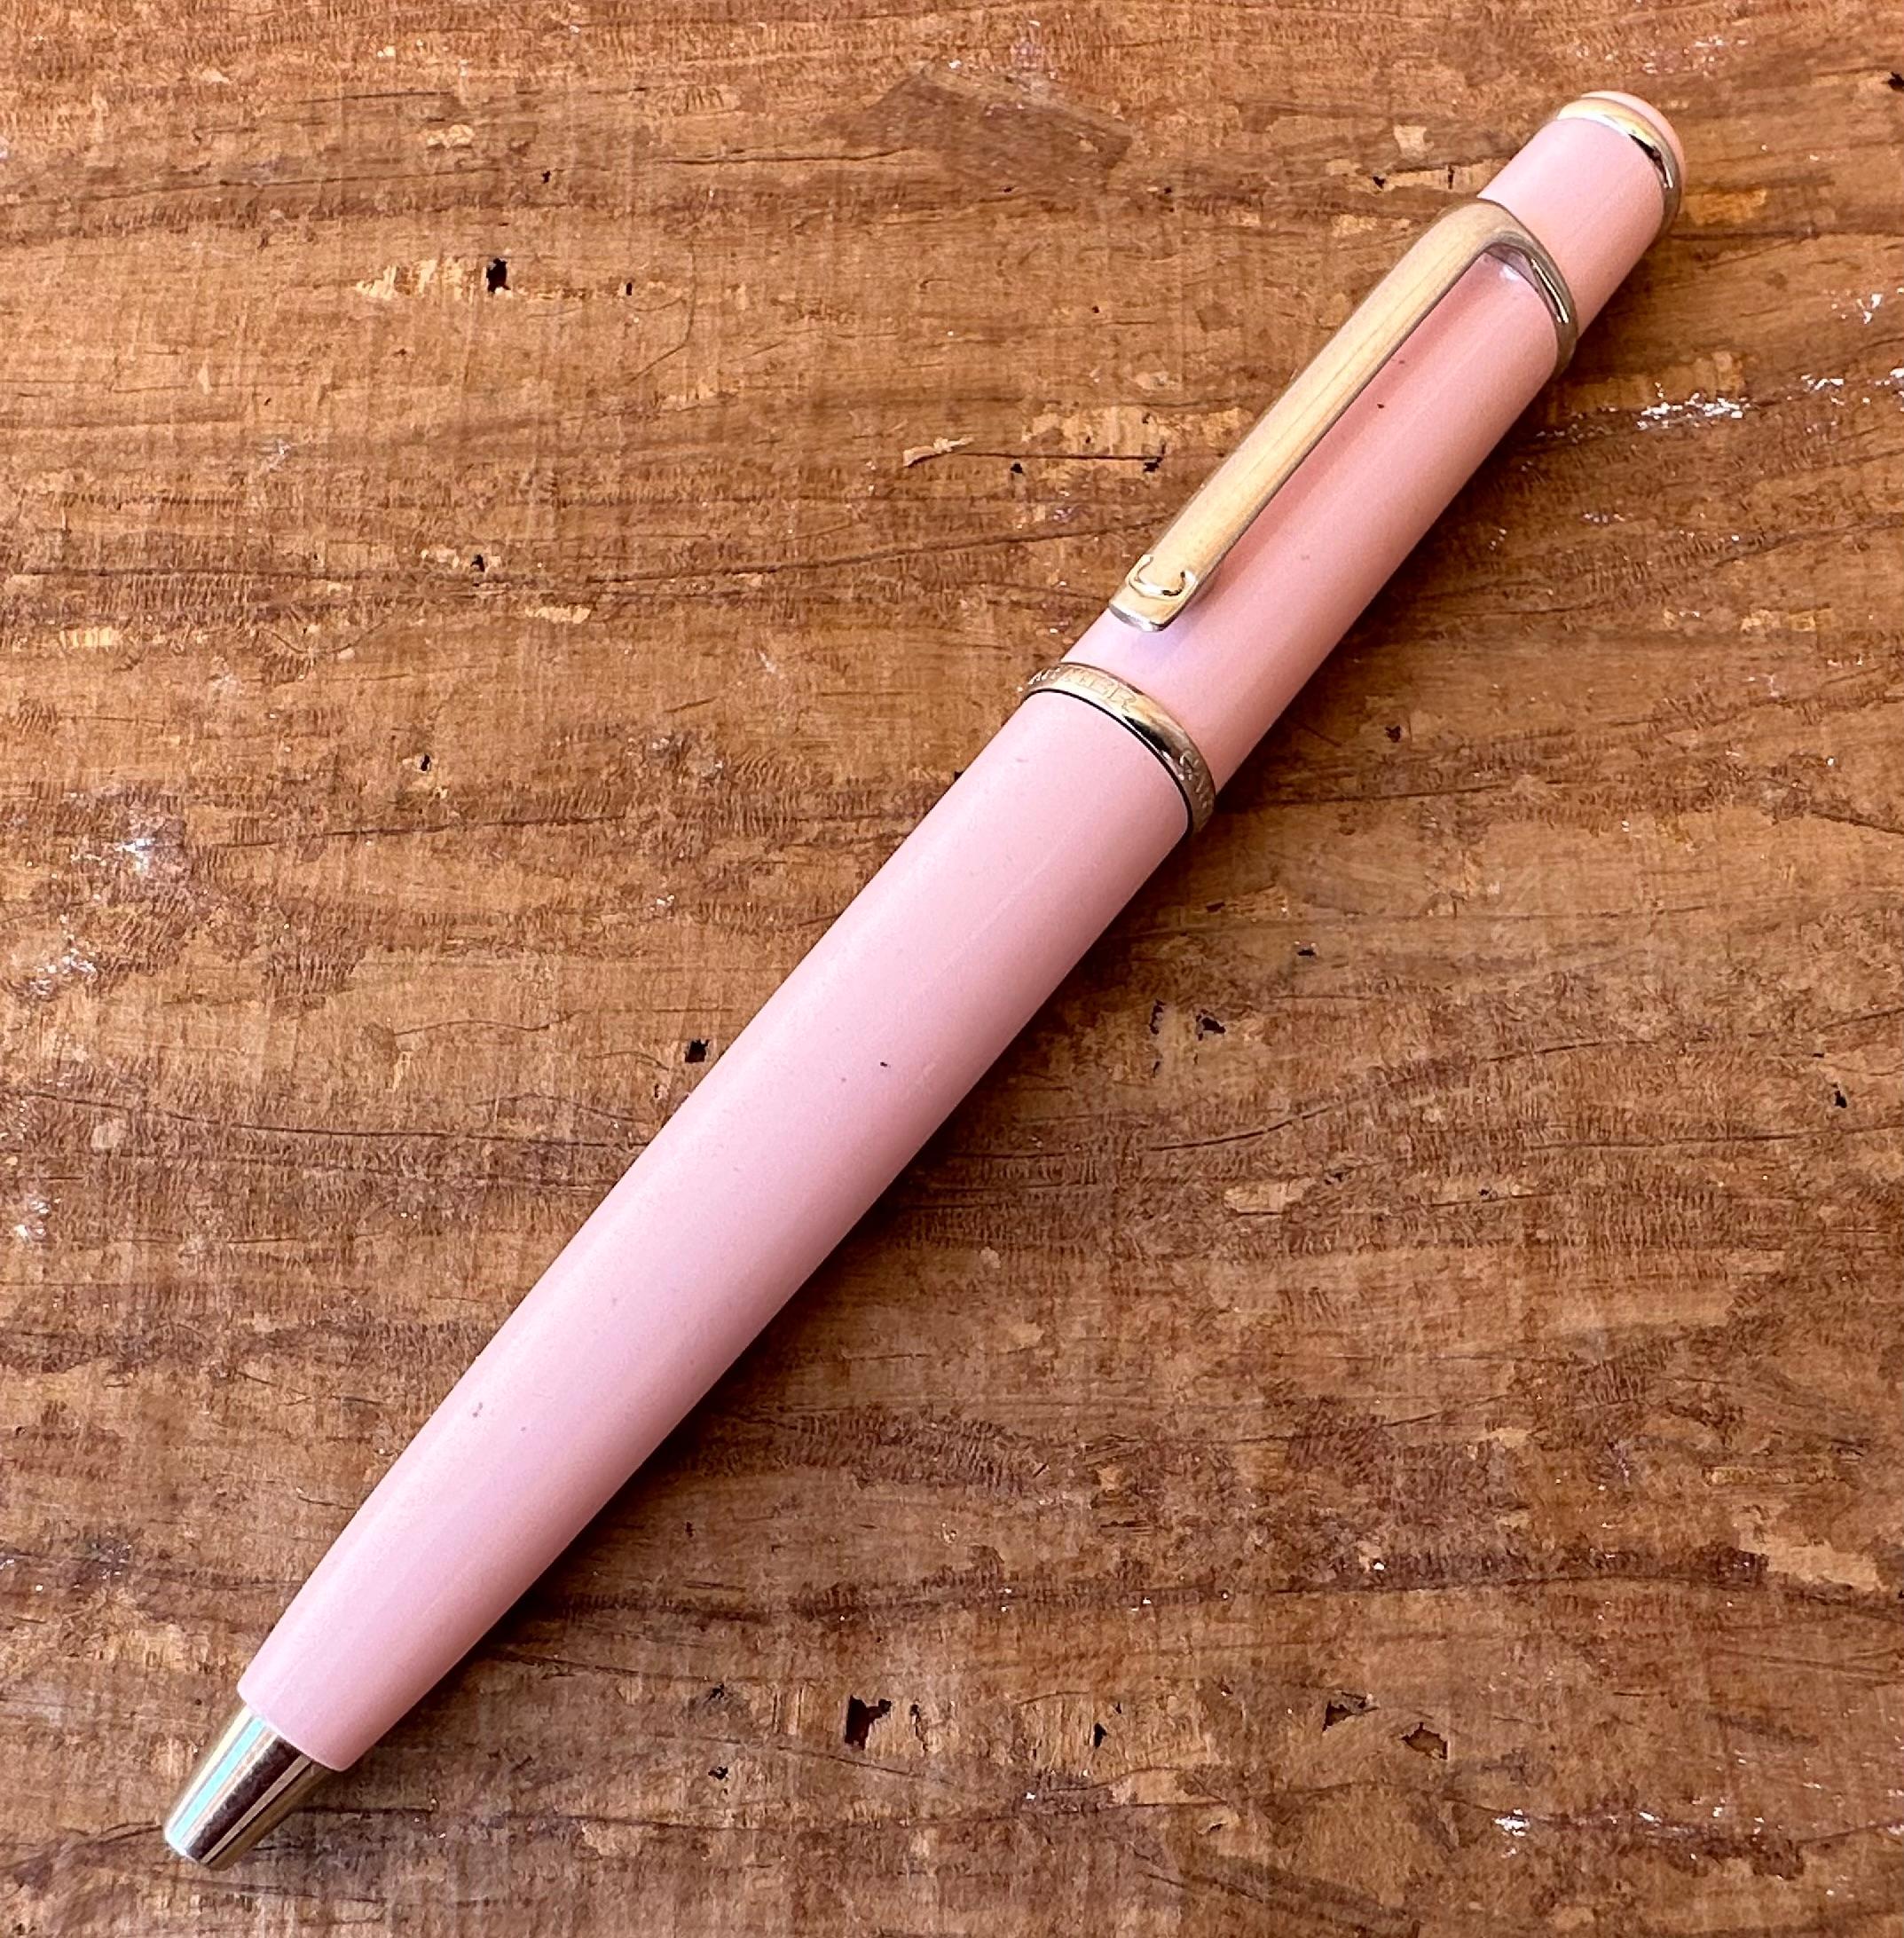 Up For Sale RARE Cartier Mini Diabolo Pink Lacquer Ball Point Pen Features Pink Lacquer with Palladium plated trim, pink resin cap jewel Ballpoint .

Features

Type: Ballpoint pen

Condition : Used not much so In Excellent condition With Little Wear